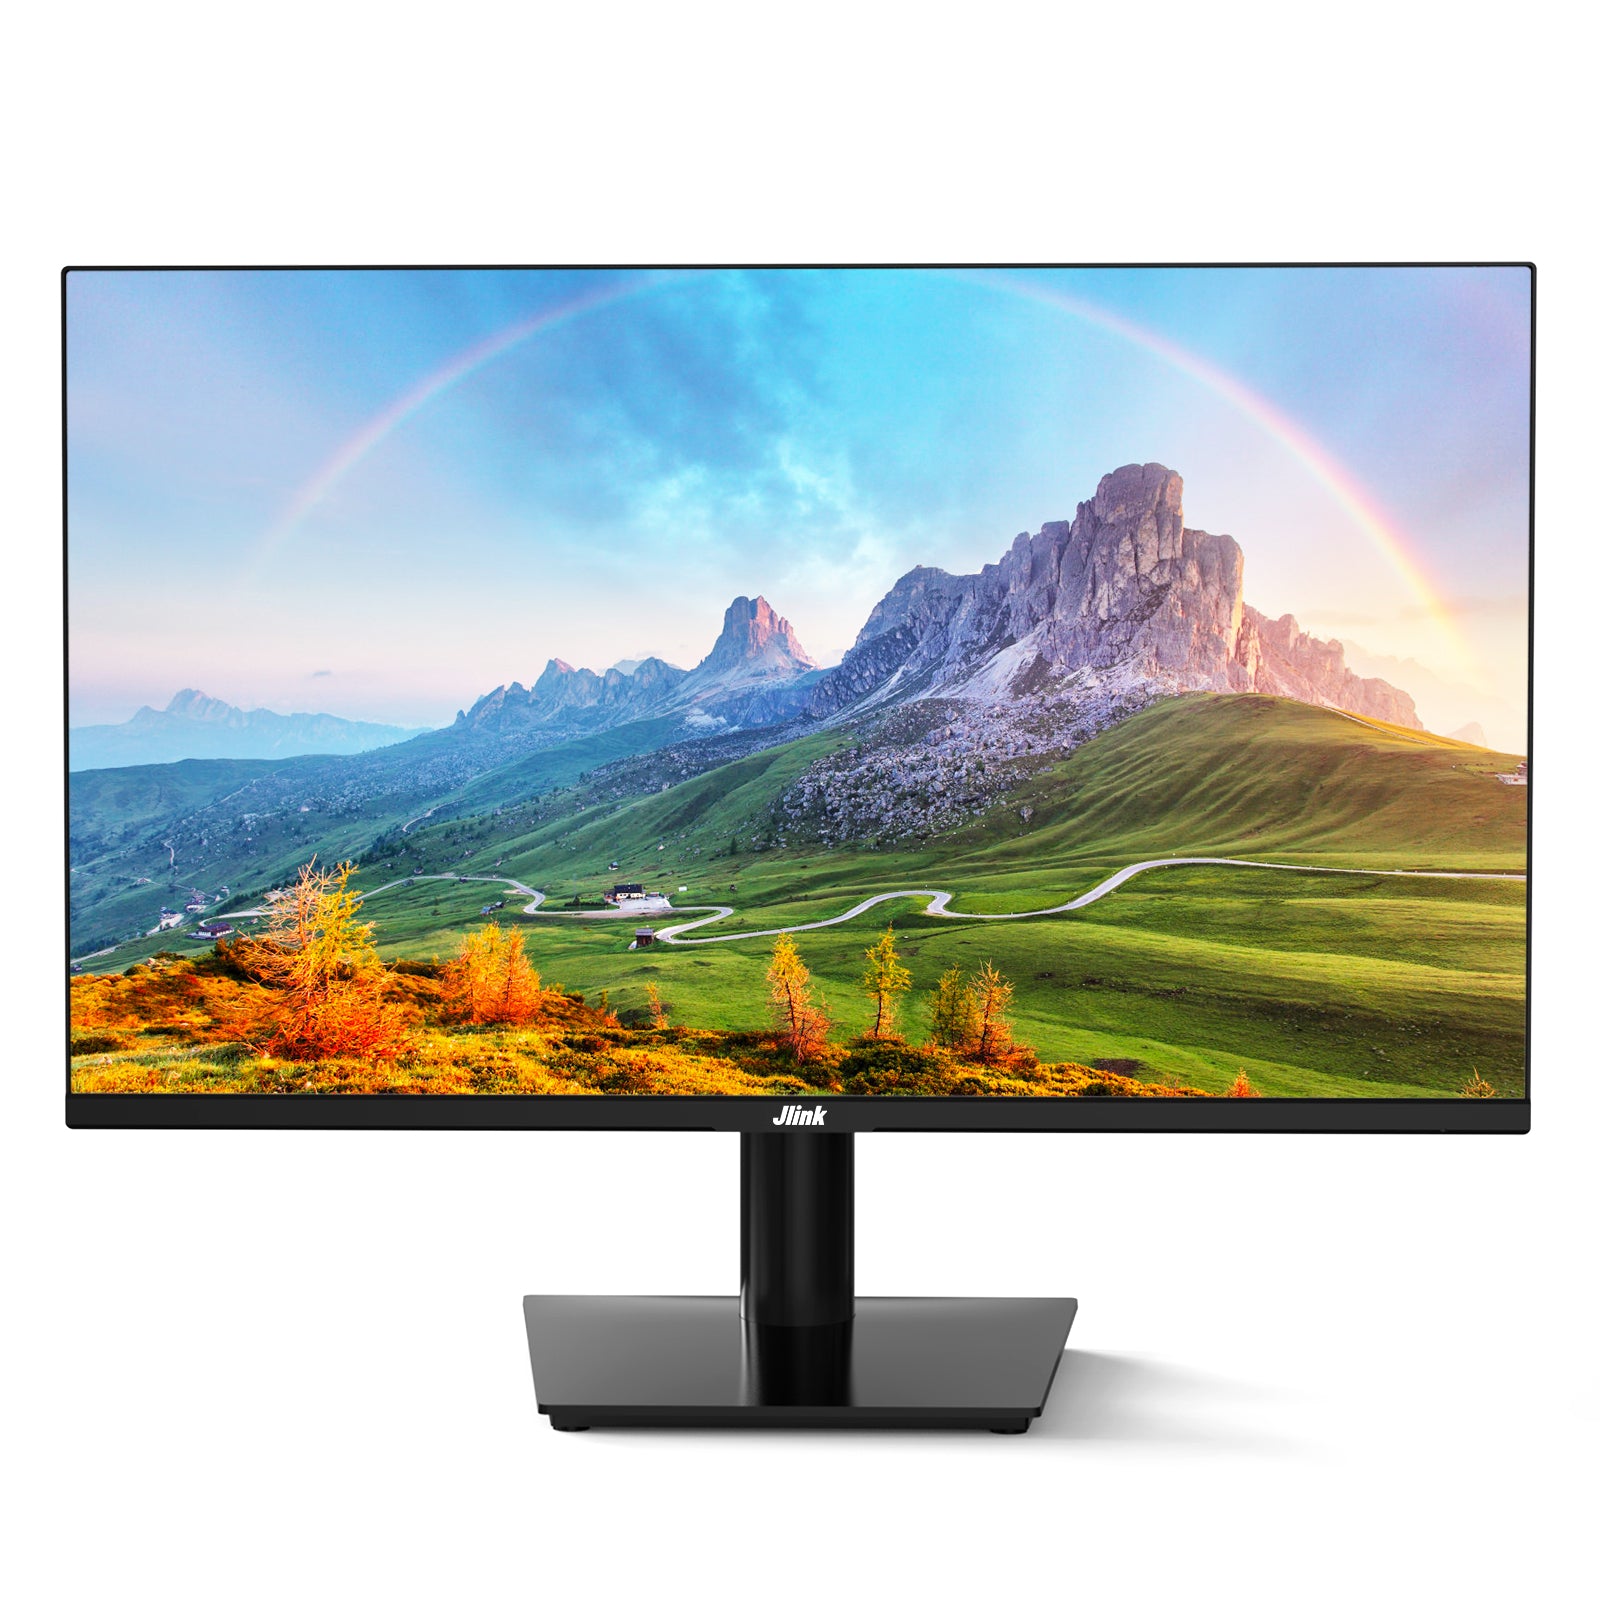 Jlink 24 Inch FHD 1920x1080P 75Hz LCD Computer Monitor